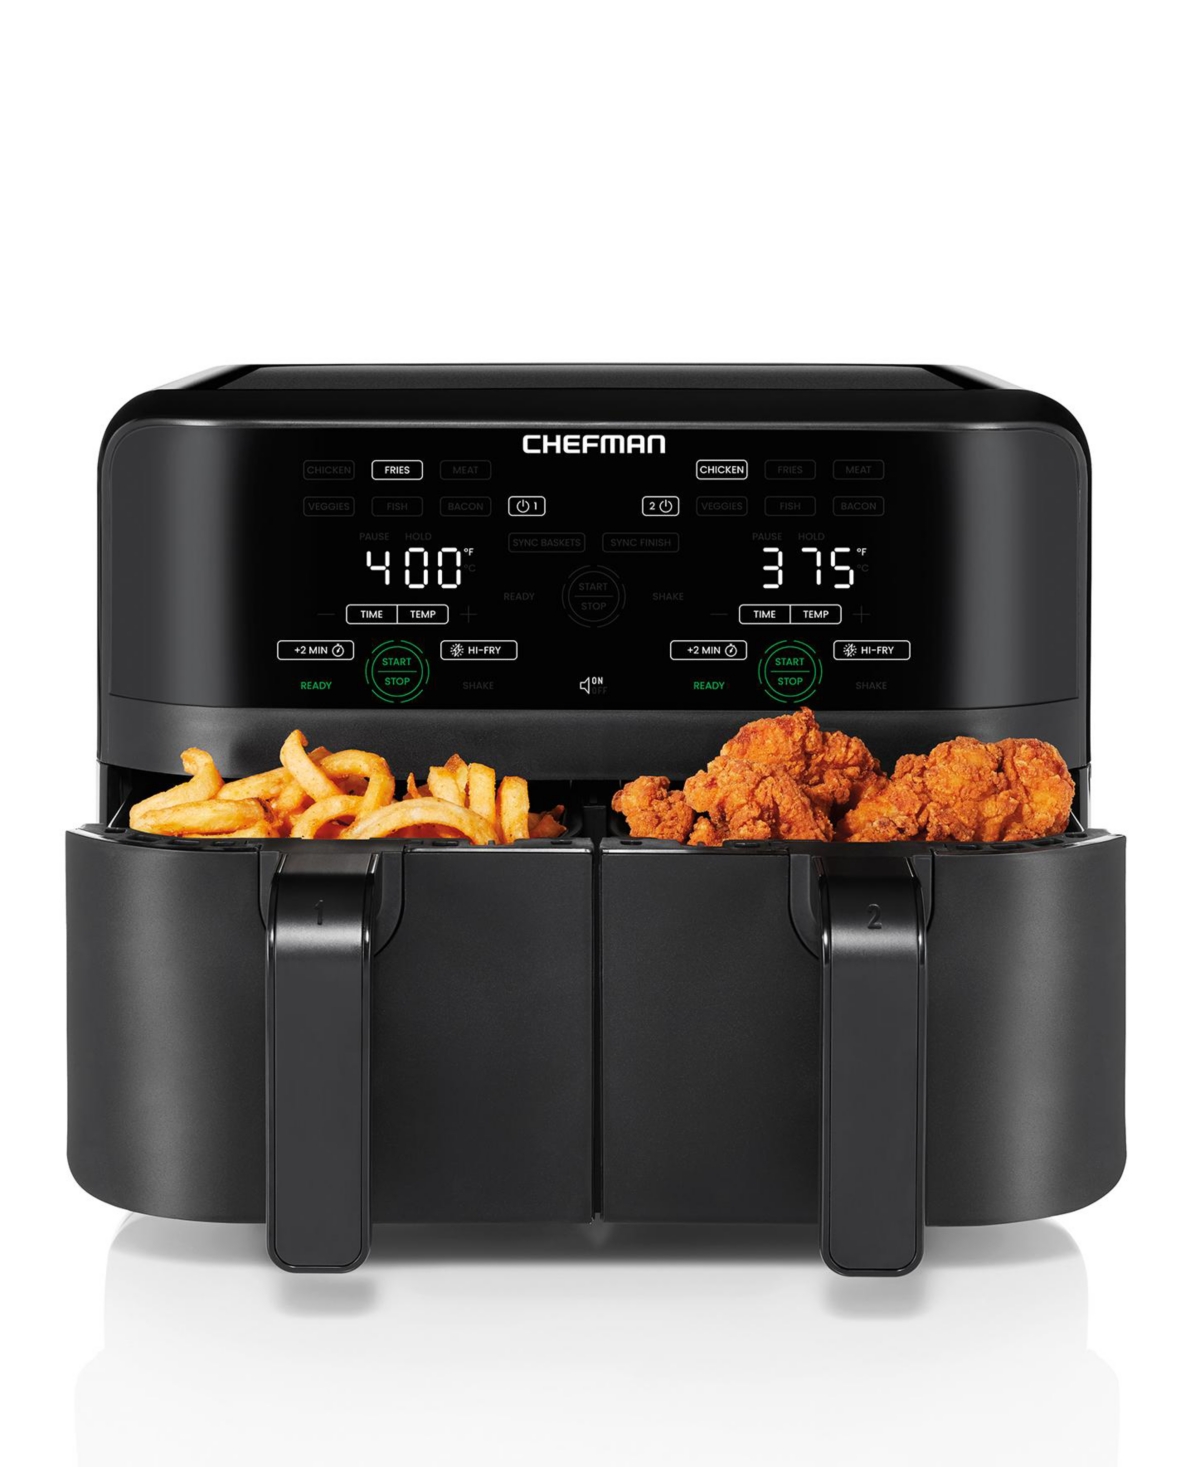 Chefman 9 Quart Air Fryer Square Digital With Double Baskets In Black